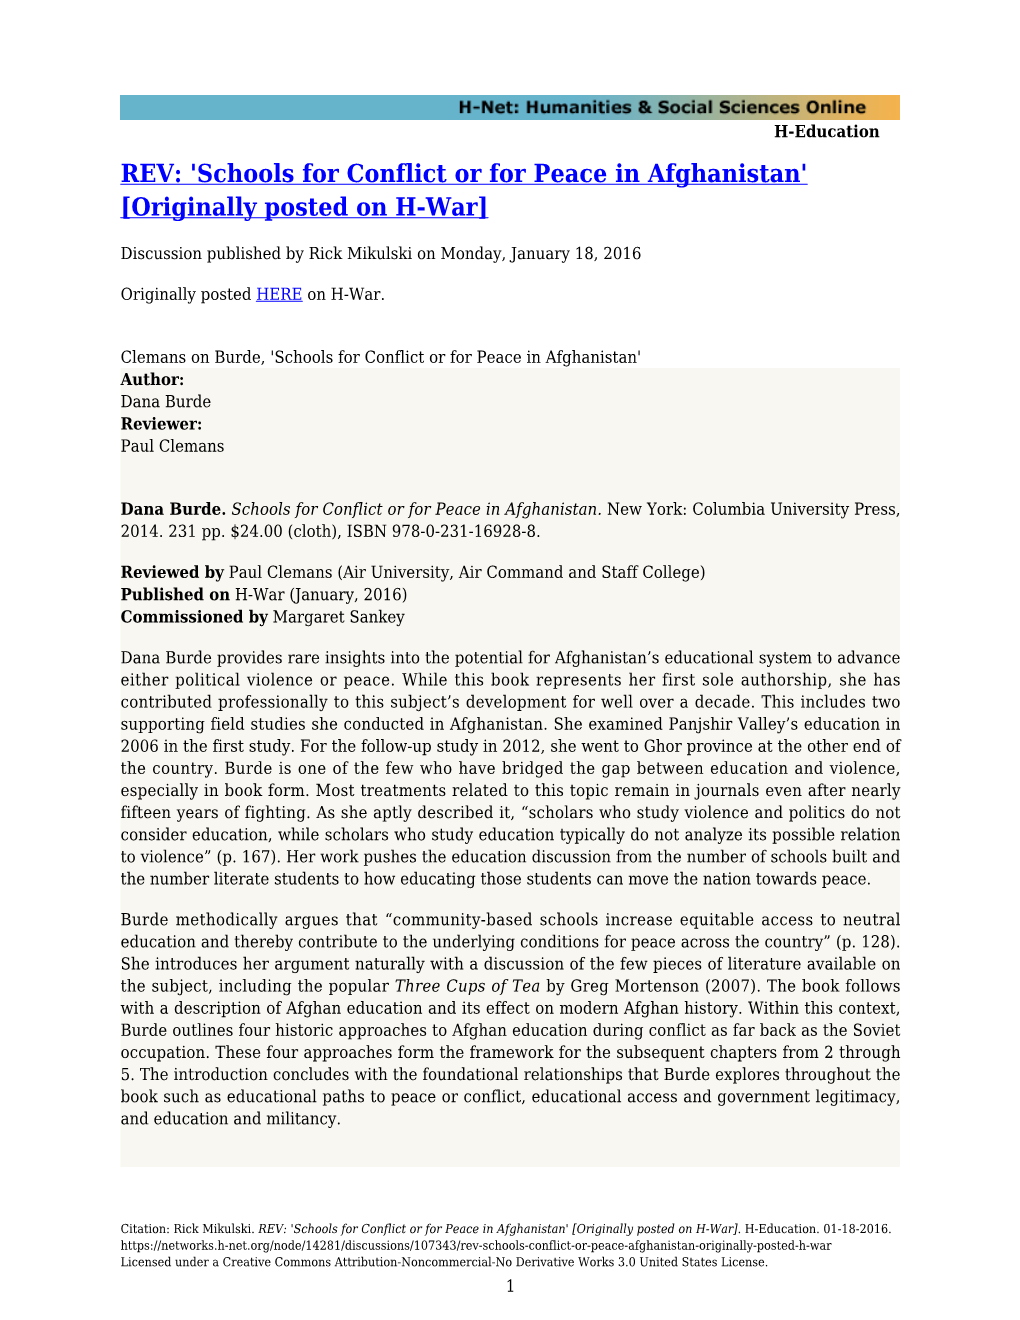 Schools for Conflict Or for Peace in Afghanistan' [Originally Posted on H-War]